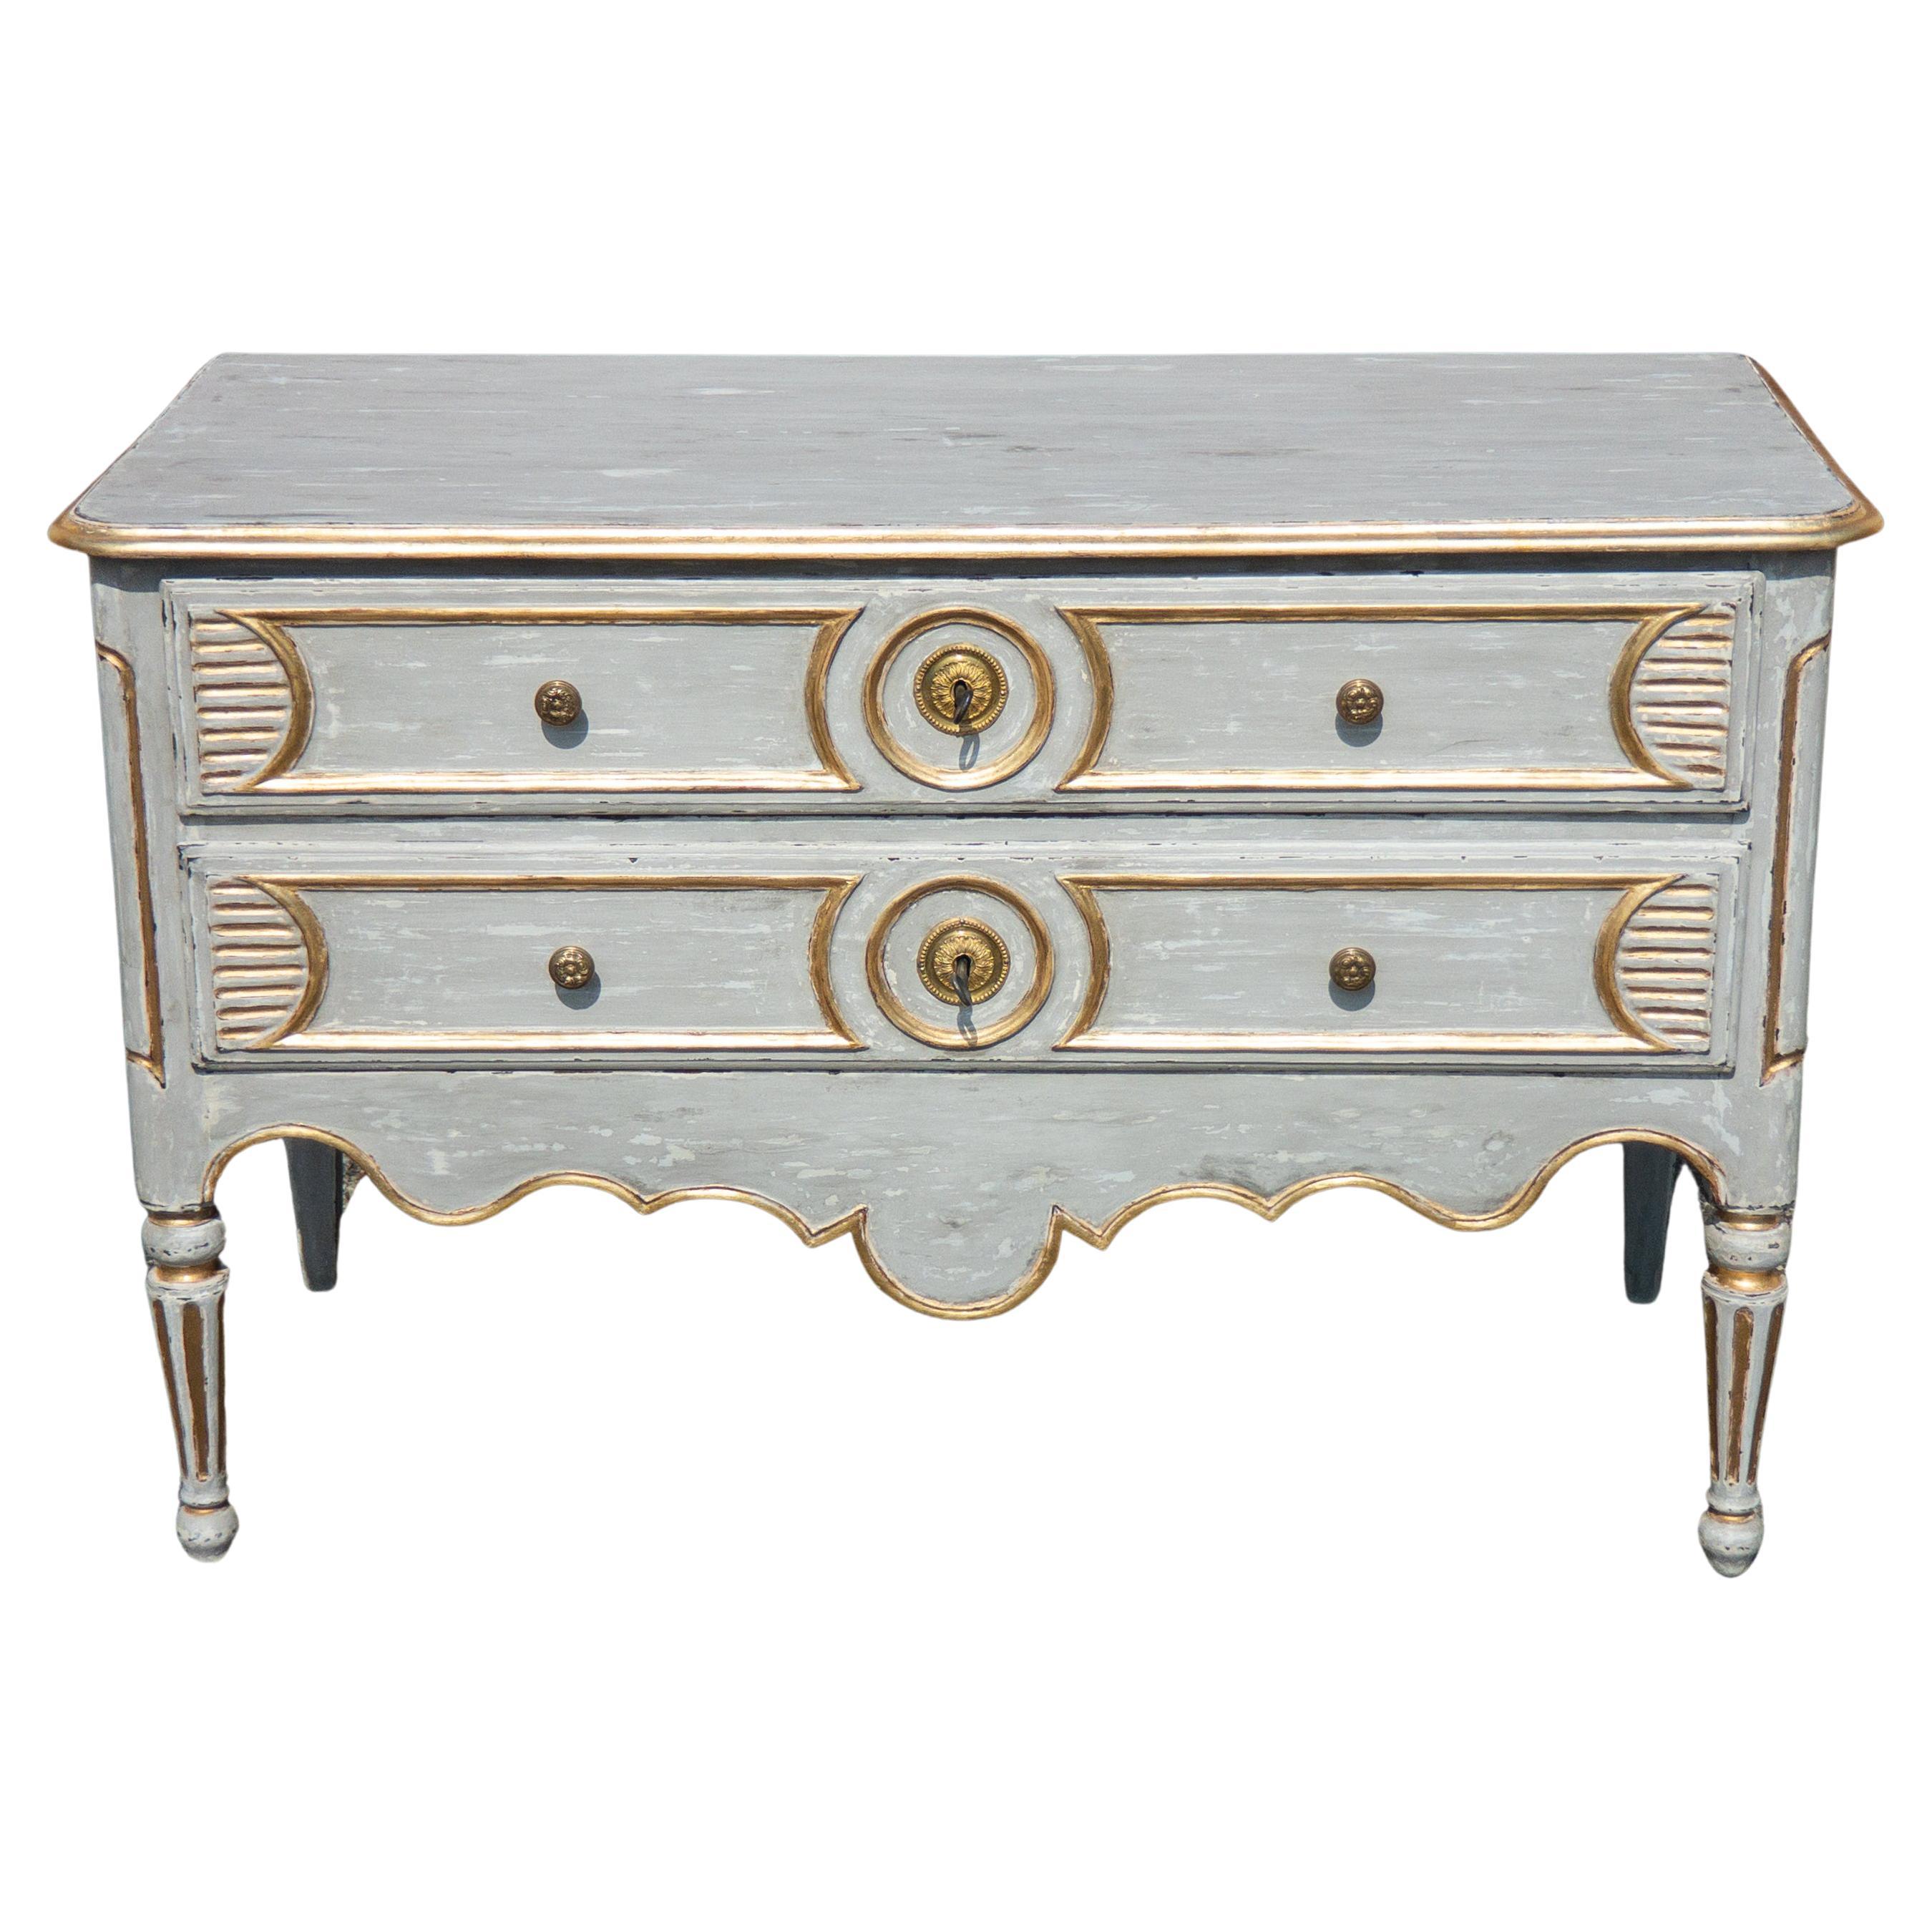 18th Century French Country Provincial Grey White and Gold Painted Commode